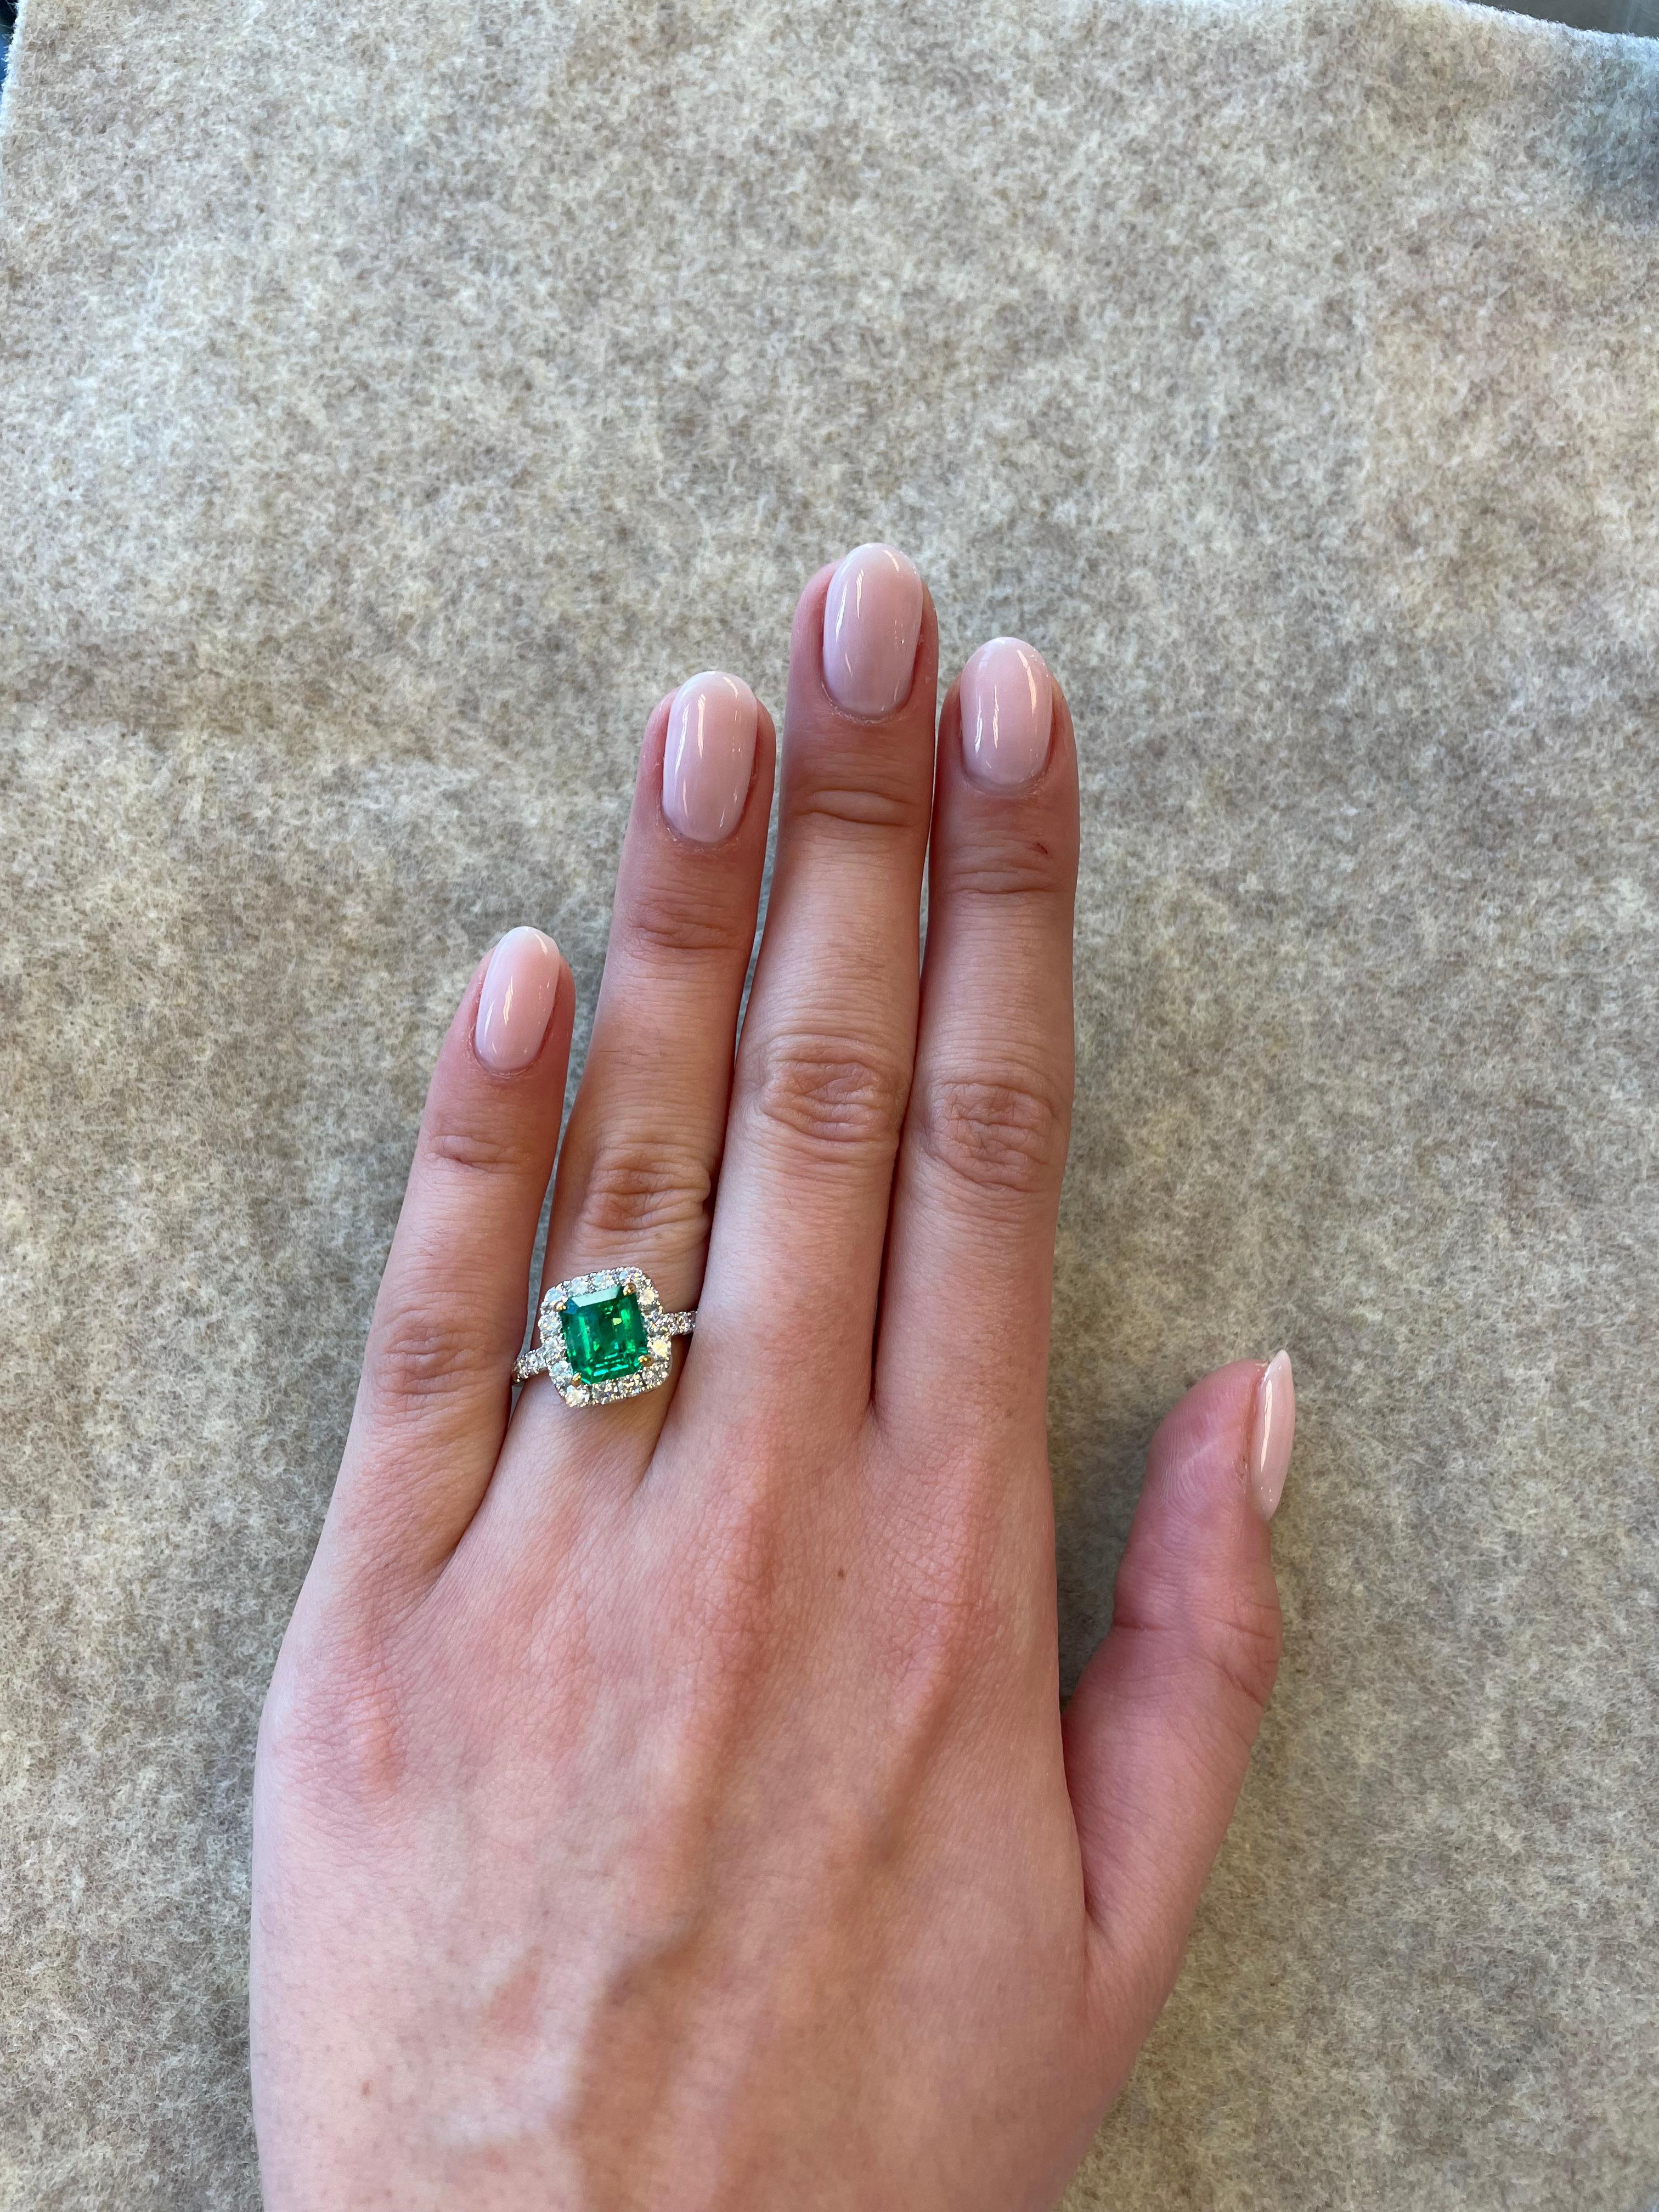 Stunning emerald and diamond halo ring with split shank.
2.56 carats total gemstone weight.
1.68 carat emerald cut emerald, apx F2. Complimented by 26 round brilliant diamonds, 0.88 carats. Approximately G/H color and SI clarity. 18k white gold with